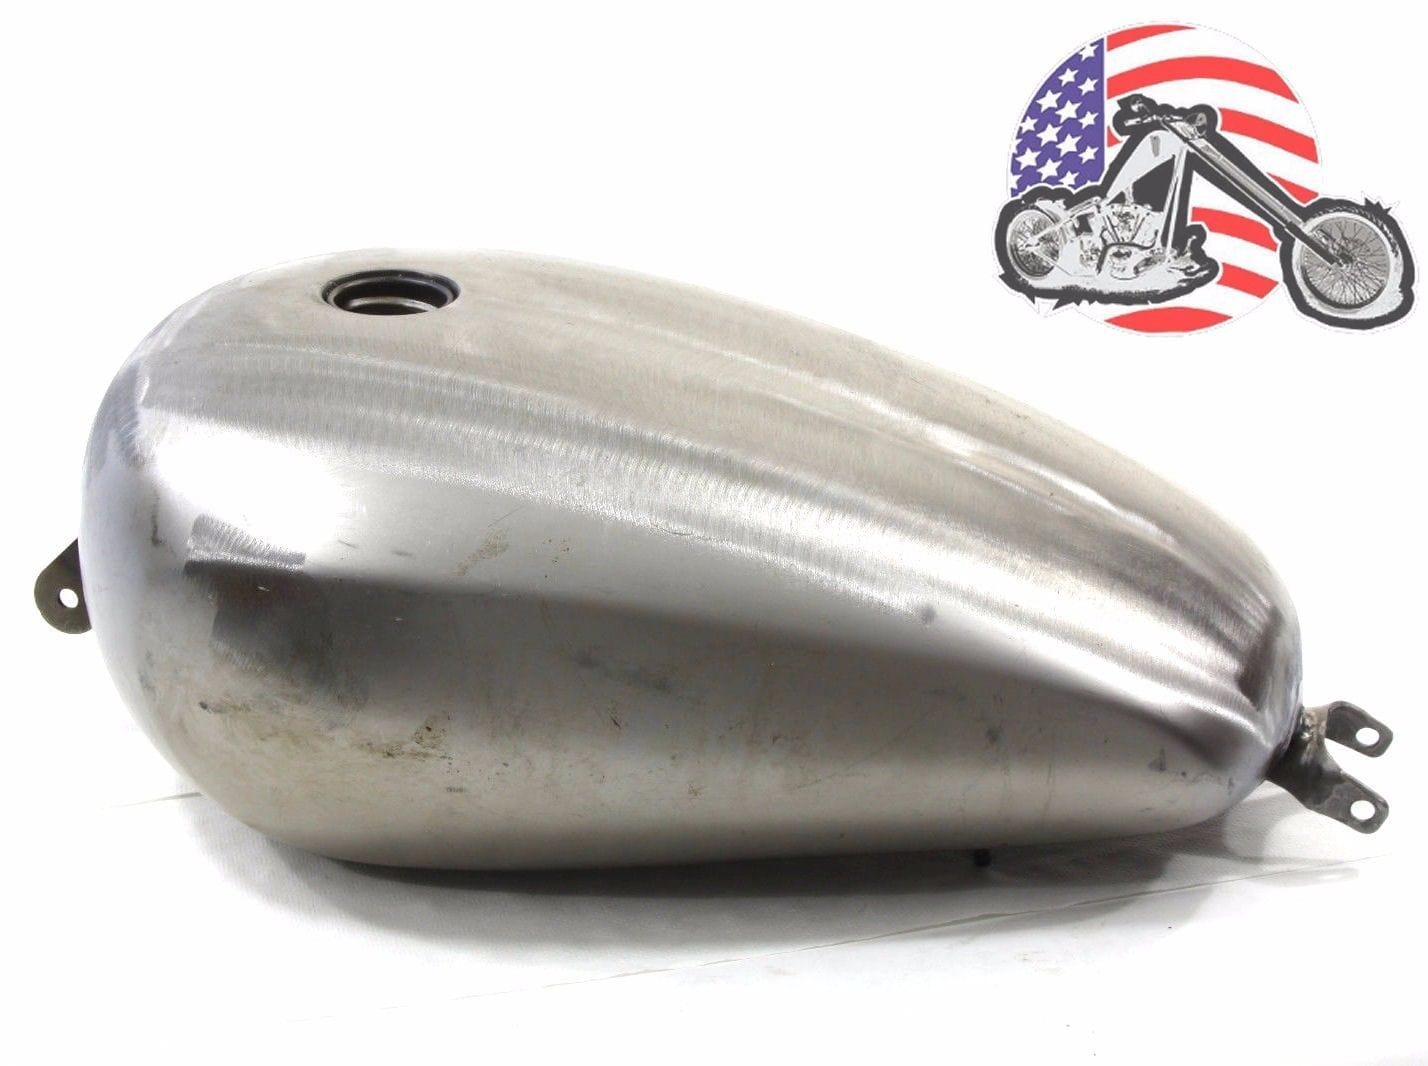 https://cdn.shopify.com/s/files/1/1876/1479/products/v-twin-manufacturing-4-5-gallon-gas-tanks-4-5-gallon-replacement-fuel-gas-tank-efi-injected-injection-harley-sportster-xl-29818267926612.jpg?v=1679687646